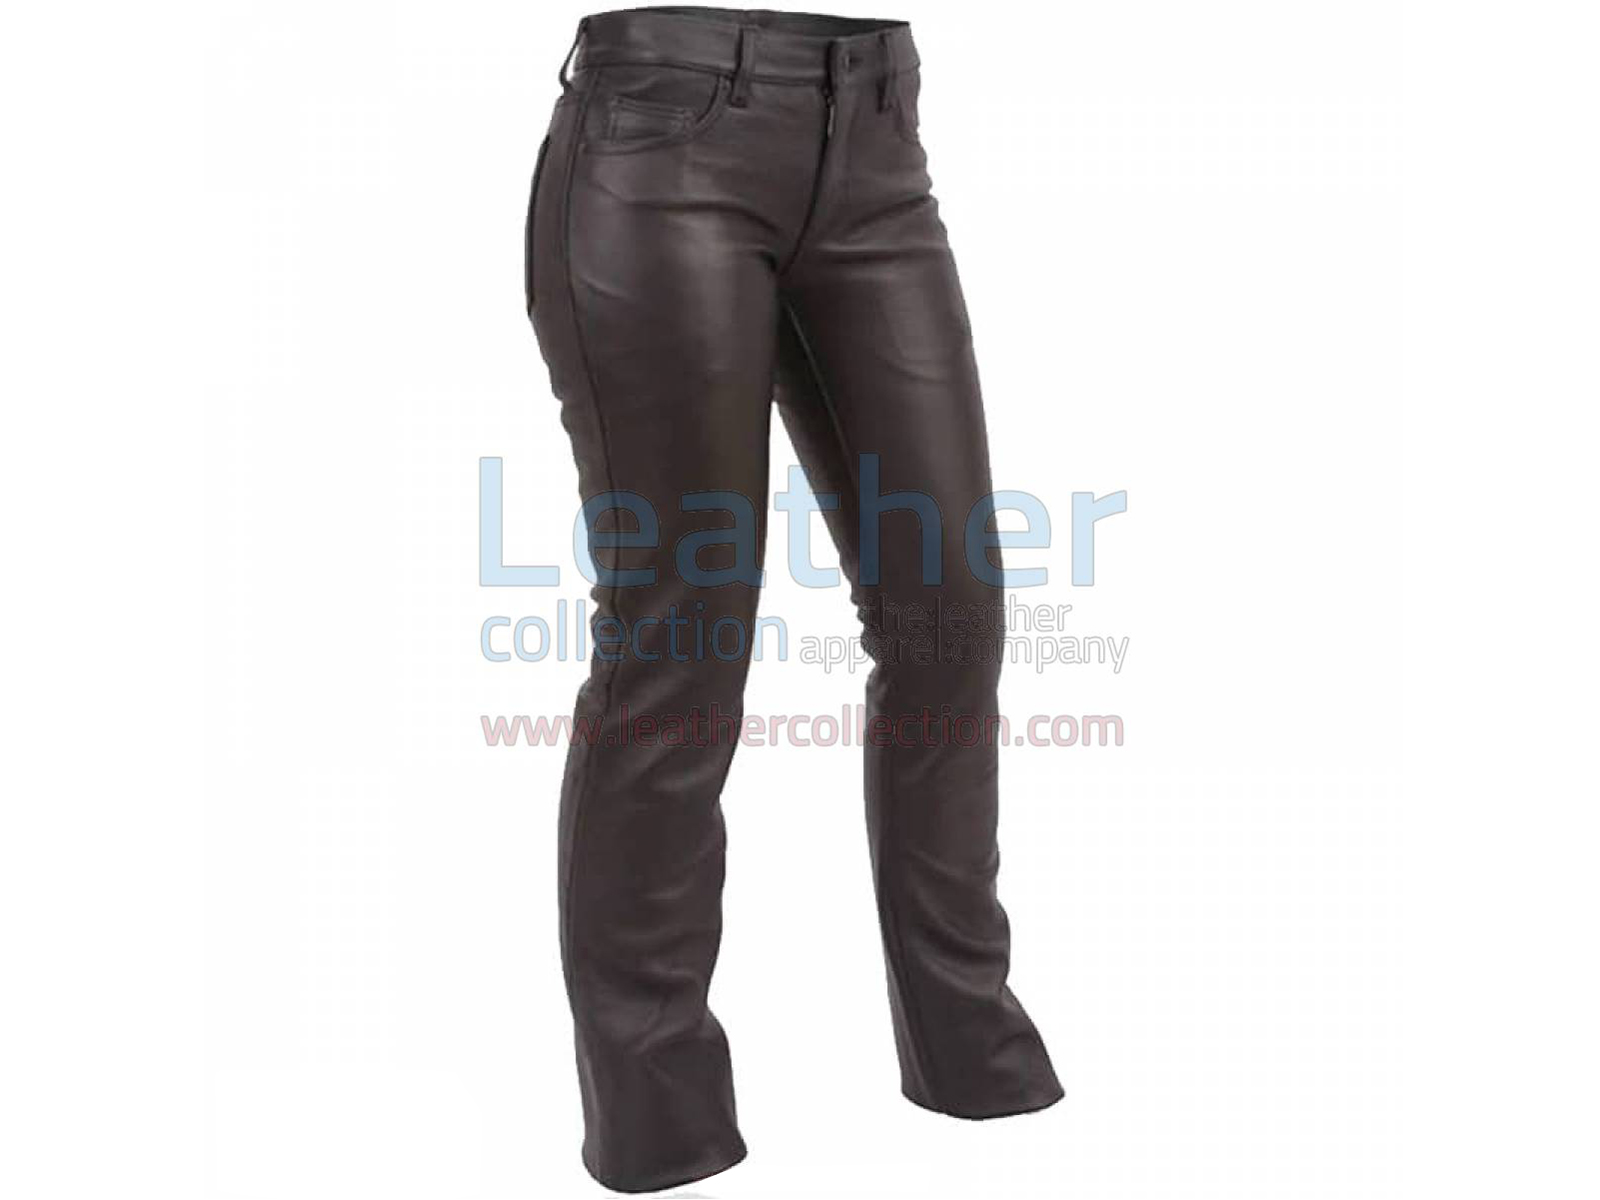 Jeans Style Low Rise Leather Pants - Racing Duke